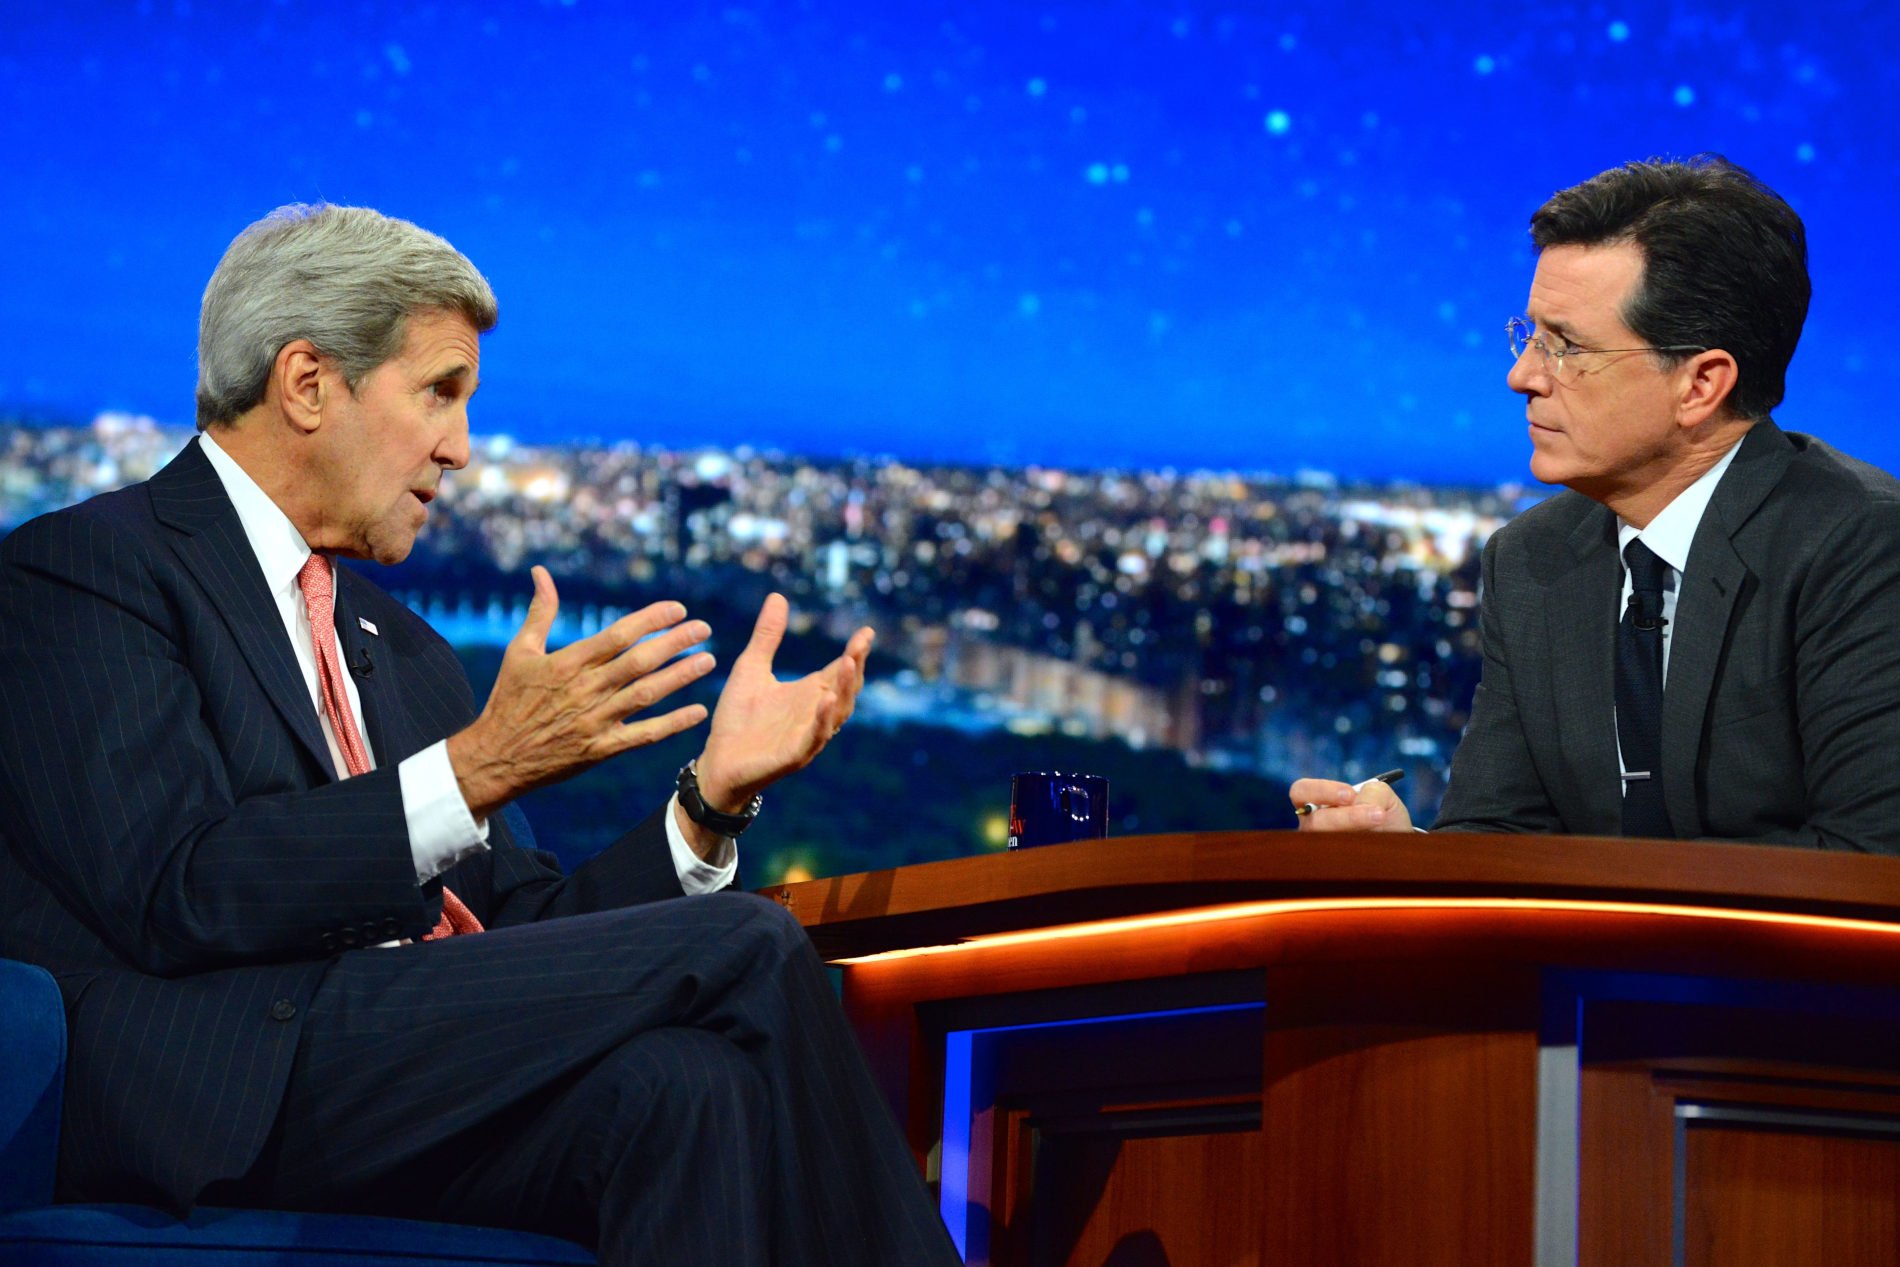 John Kerry v the <b><i>Late Show</i></b>. Zdroj U.S. Department of State from United States. Creative Commons, CC BY 2.0